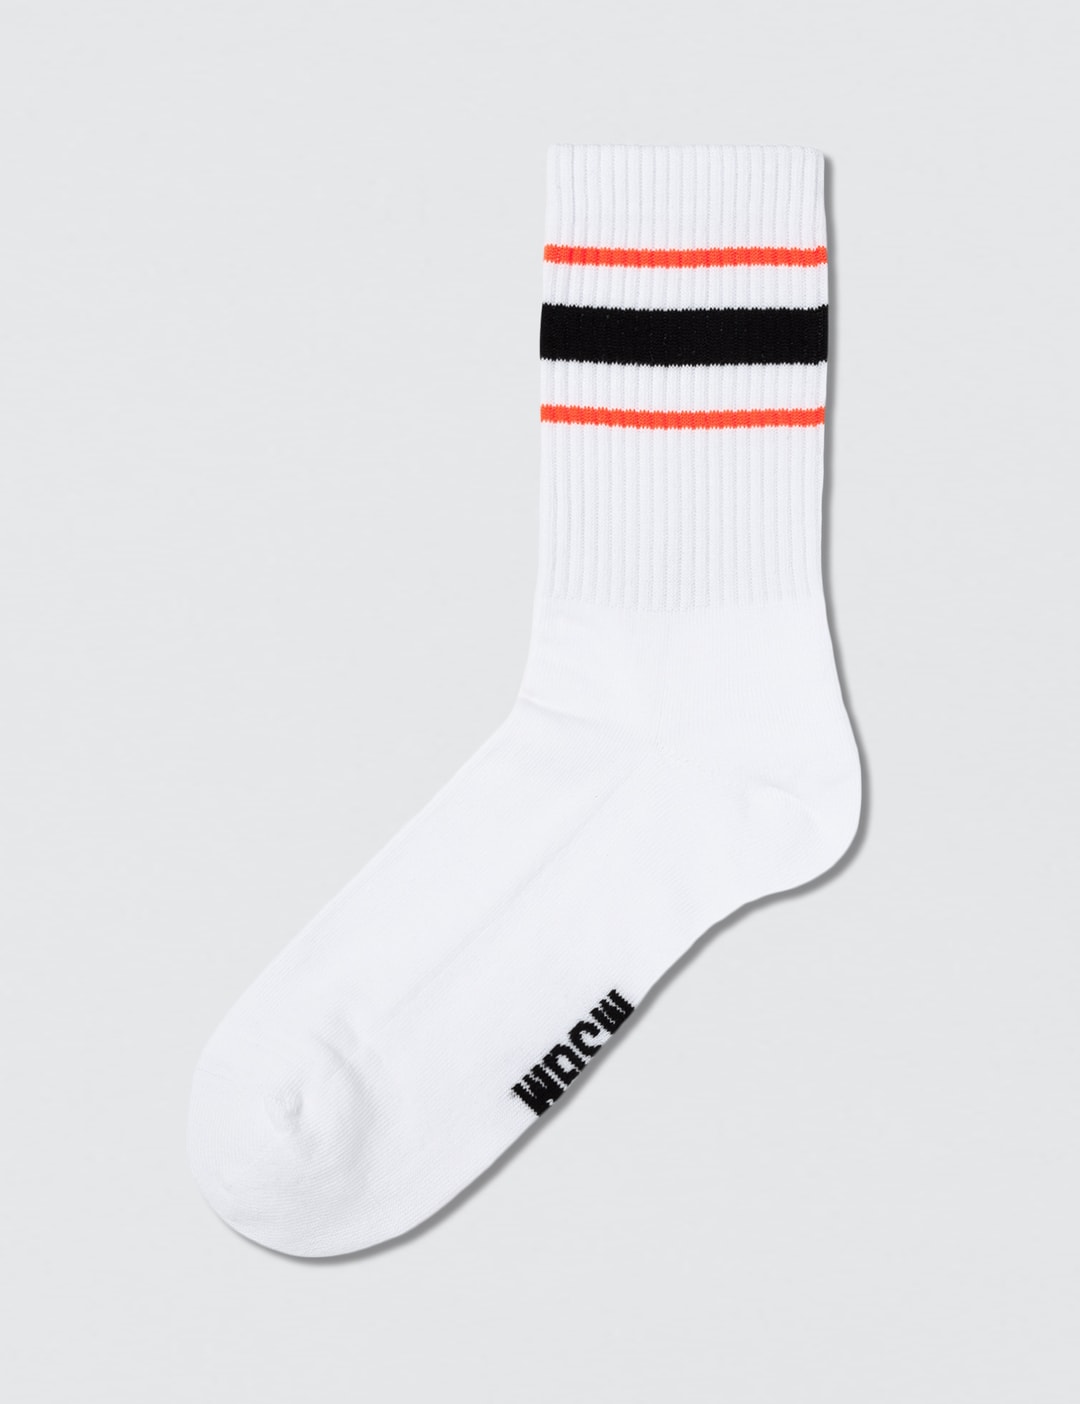 MSGM - Logo Socks | HBX - Globally Curated Fashion and Lifestyle by ...